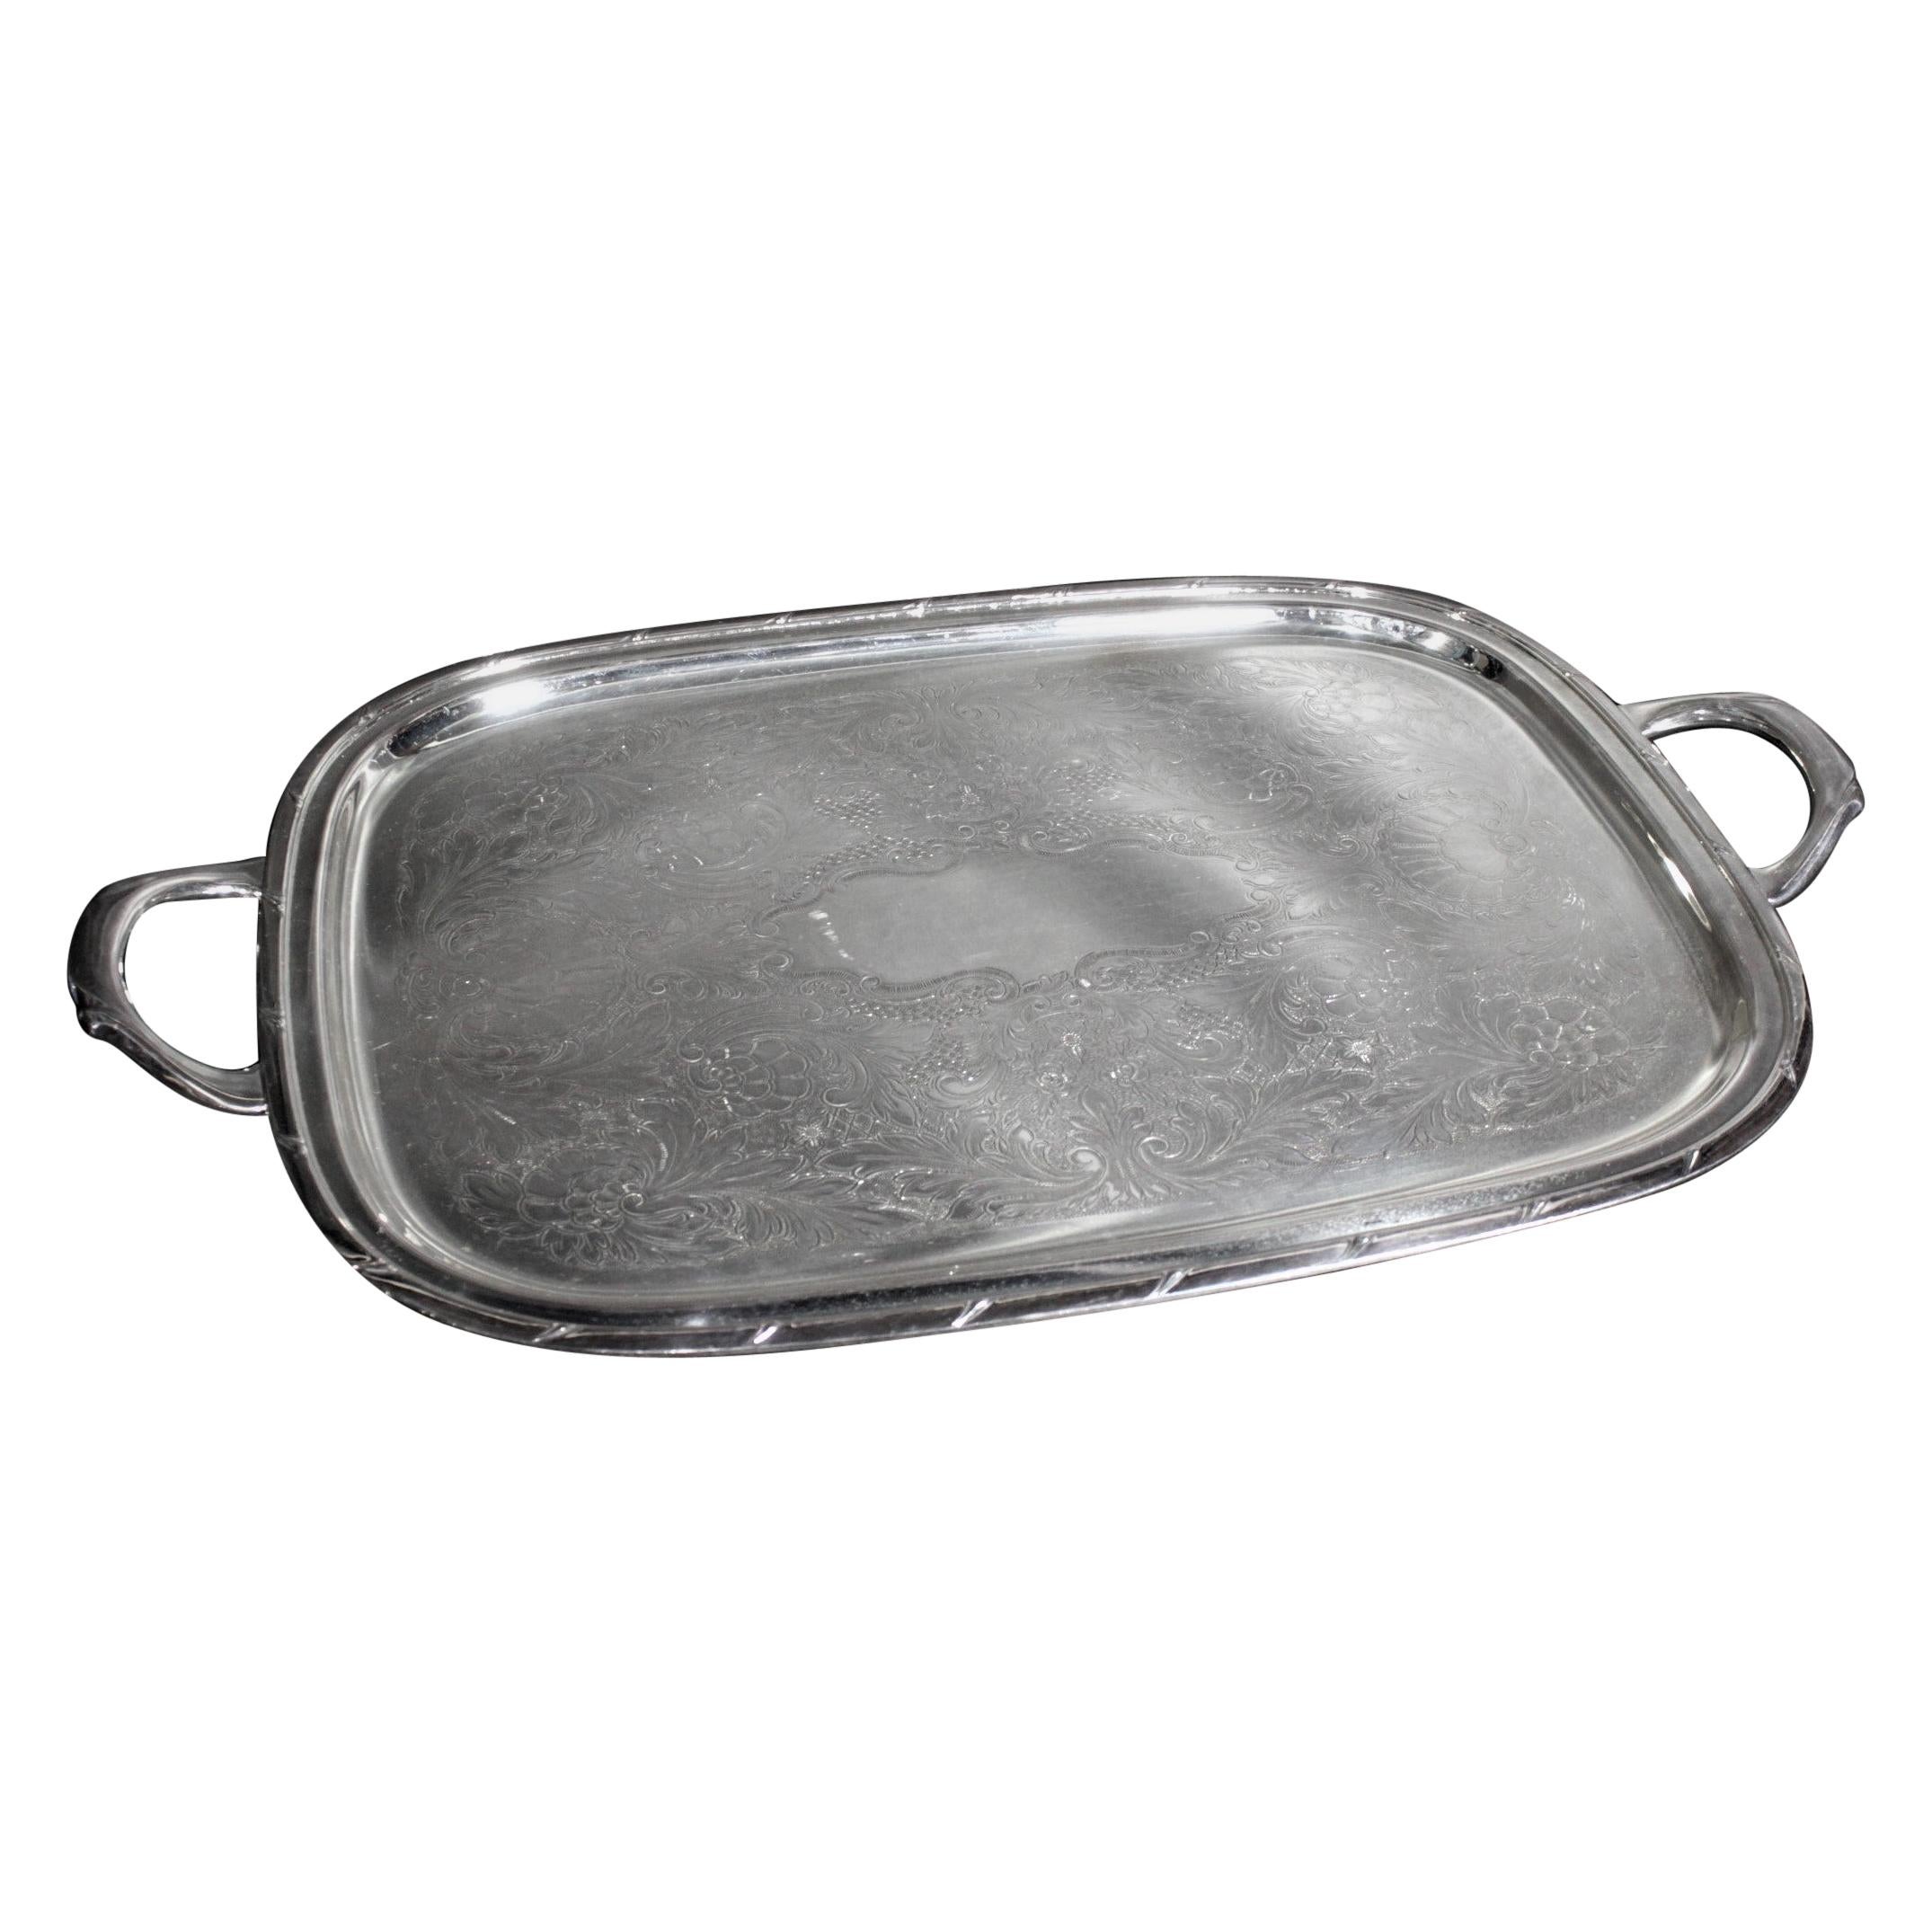 Rogers Antique Styled Silver Plated Engraved Serving Tray For Sale